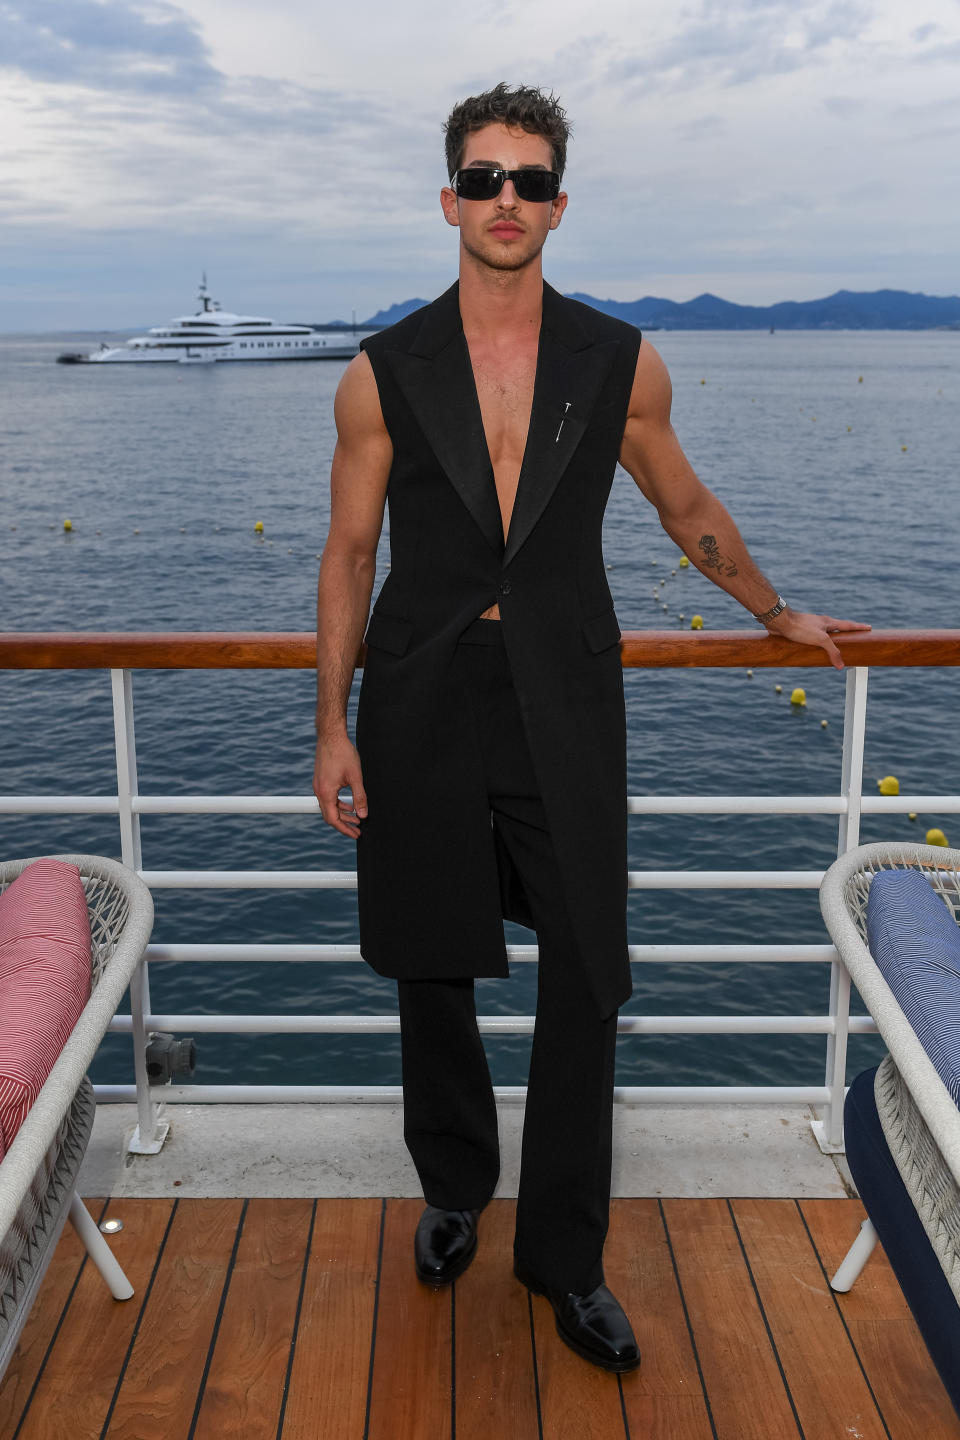 Manu Rios Fernandez attends the Red Sea International Film Festival's 'Women's Stories Gala' in partnership with Vanity Fair Europe at the Hotel du Cap-Eden-Roc.